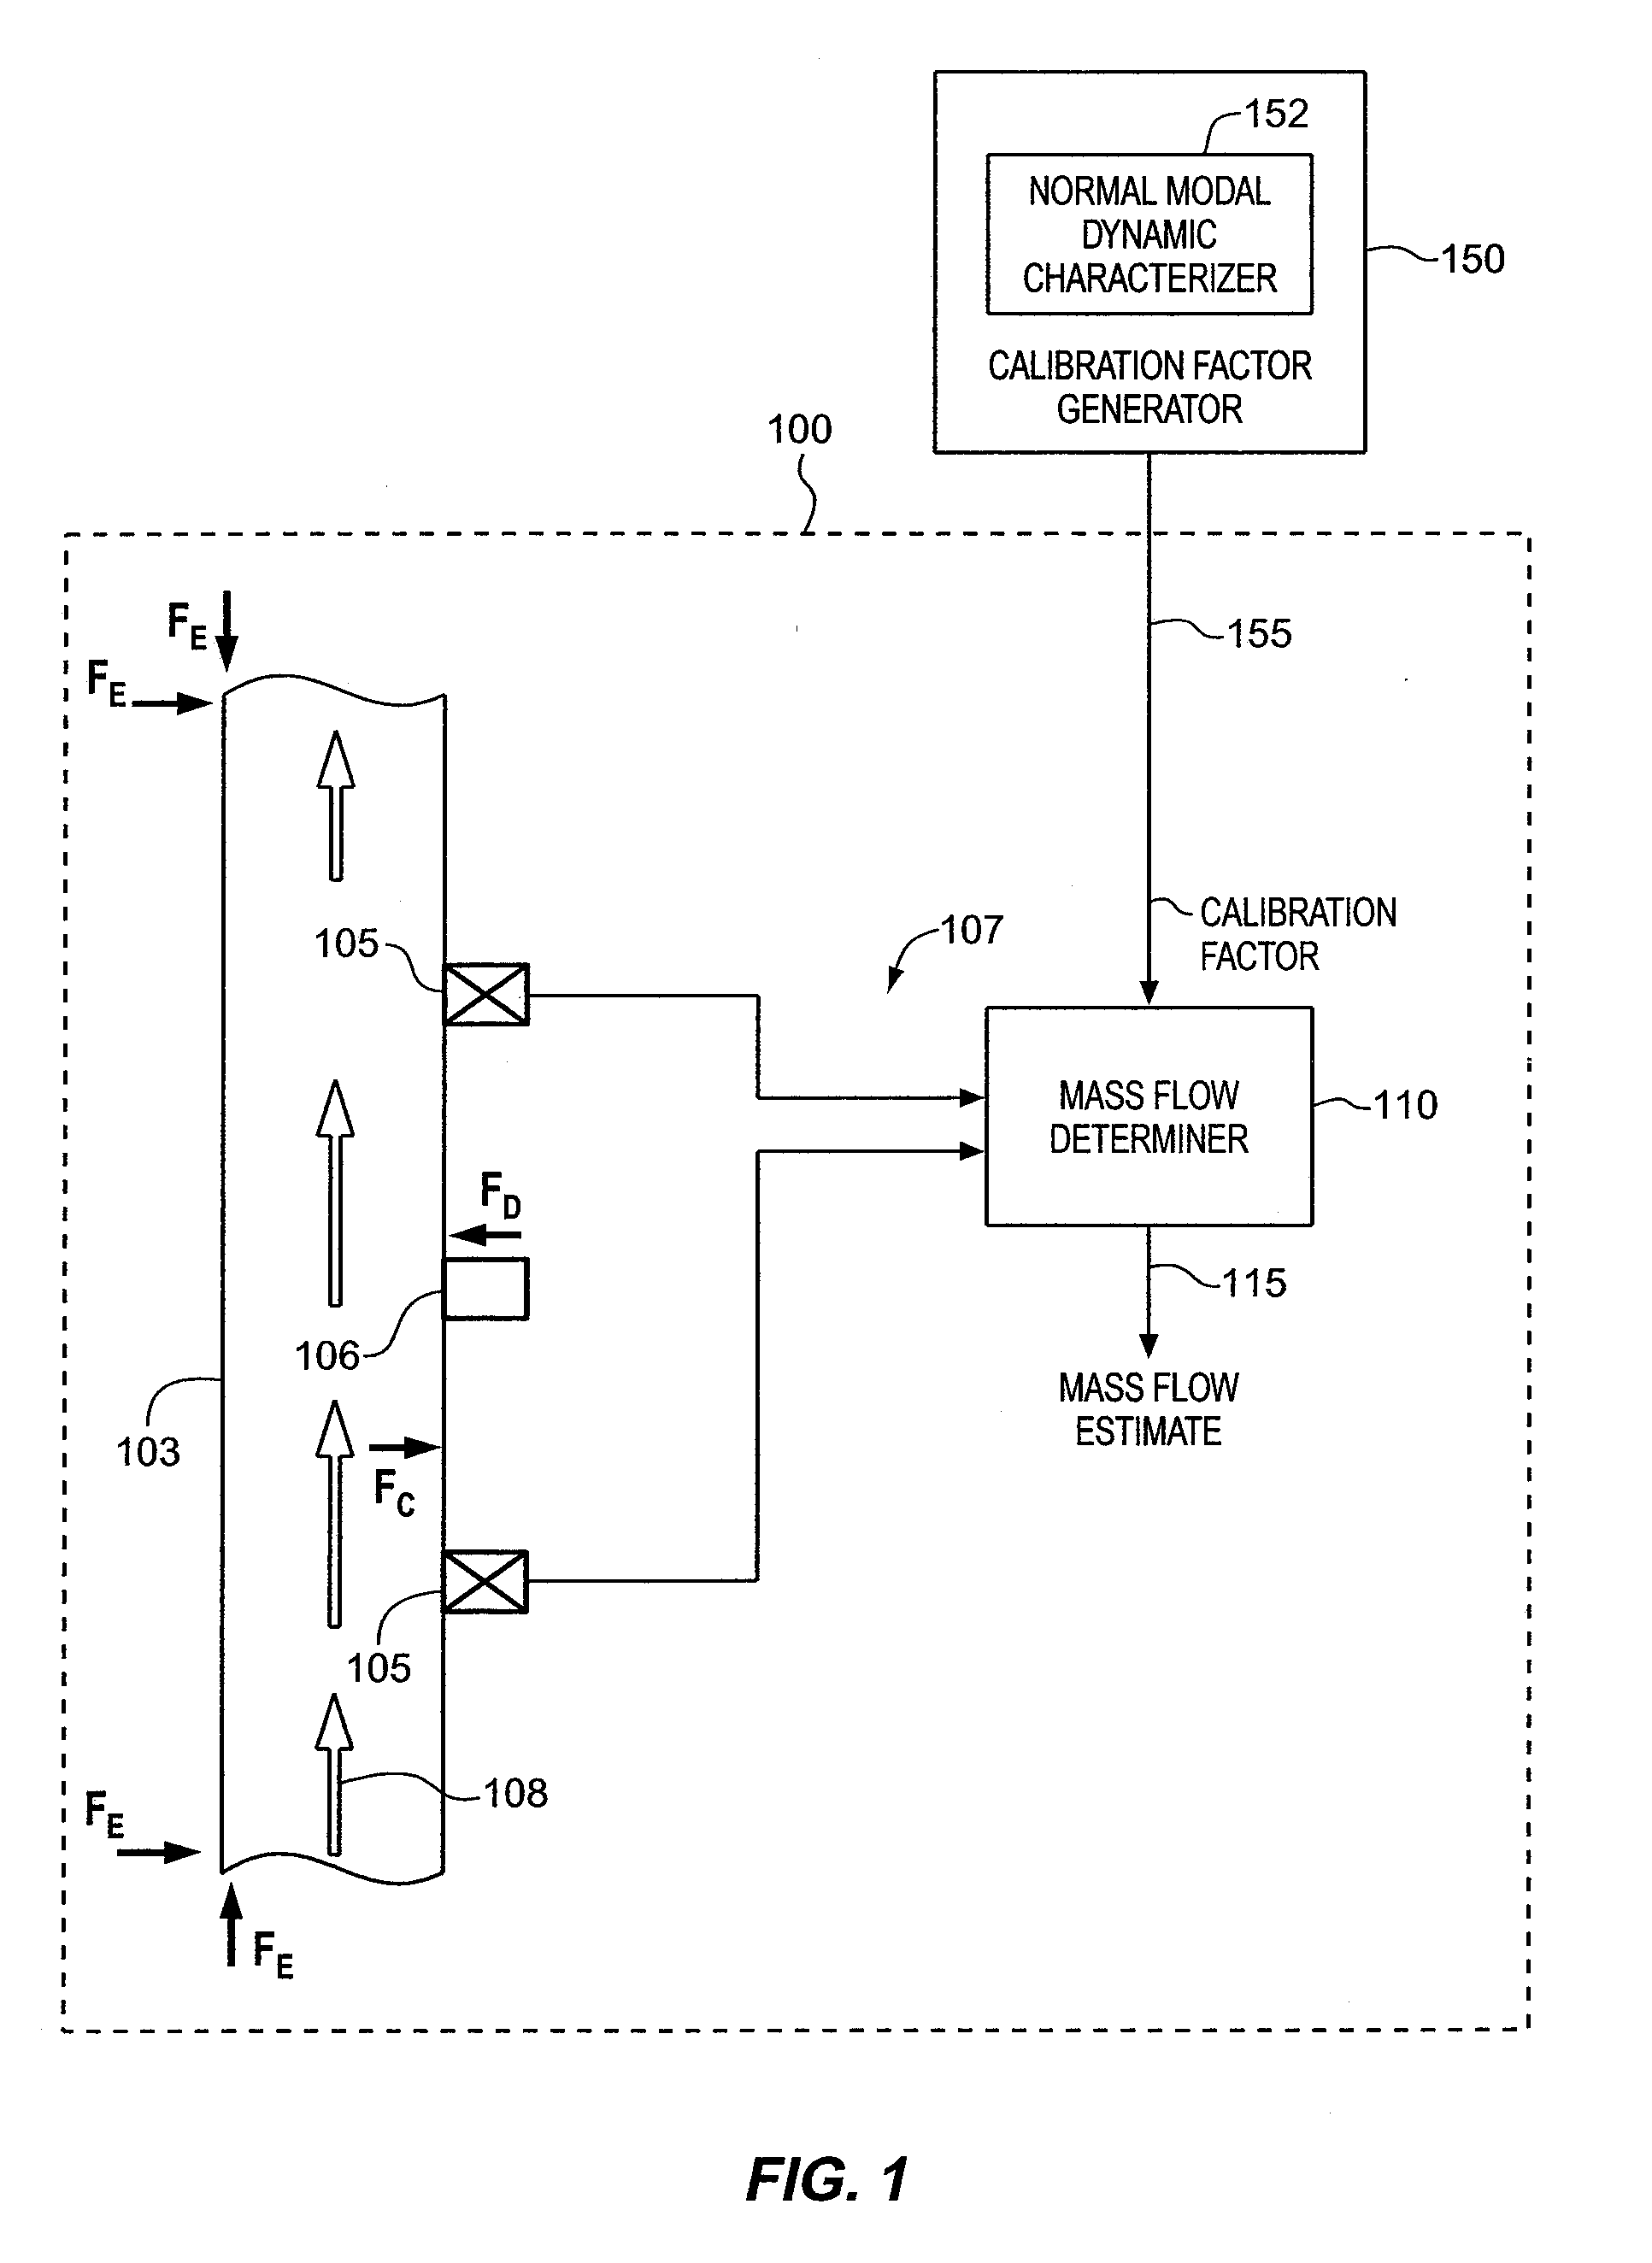 Apparatus, methods and computer program products for generating mass flow calibration factors using a normal modal dynamic characterization of a material-contained conduit